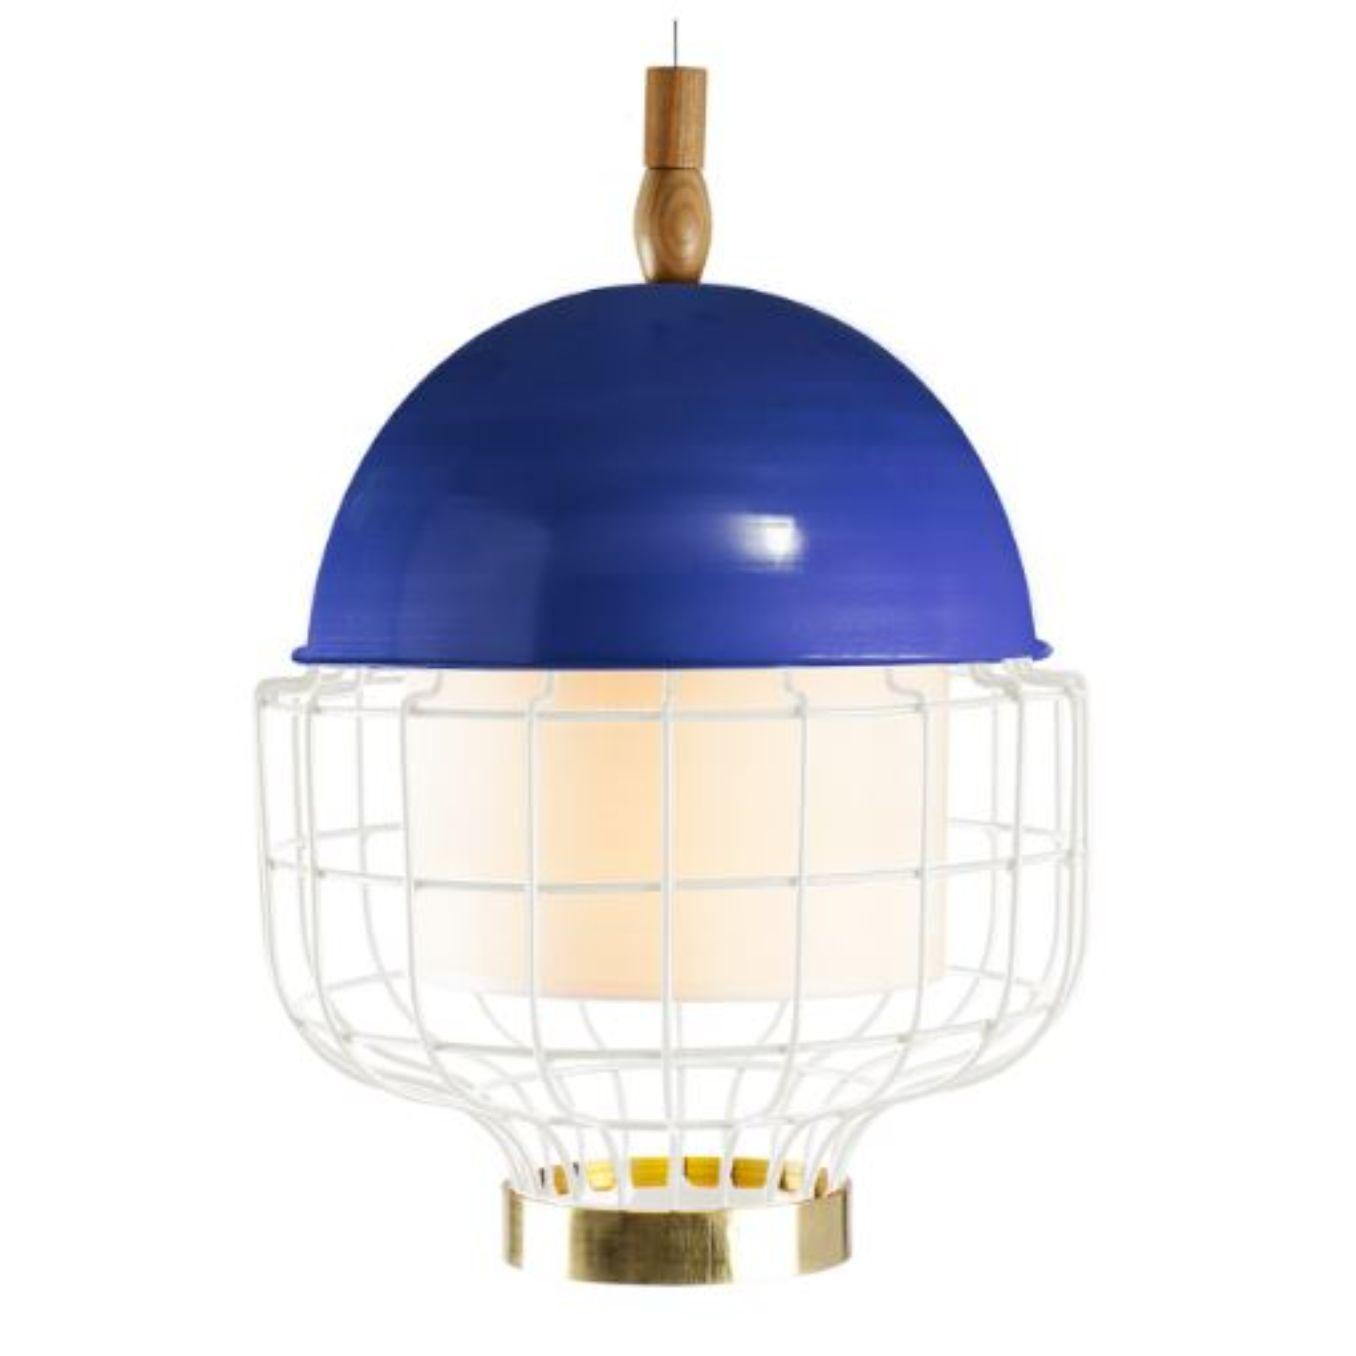 Cobalt Magnolia III suspension lamp with brass ring by Dooq.
Dimensions: W 31 x D 31 x H 42 cm.
Materials: lacquered metal, polished or brushed metal, brass.
abat-jour: cotton
Also available in different colours and